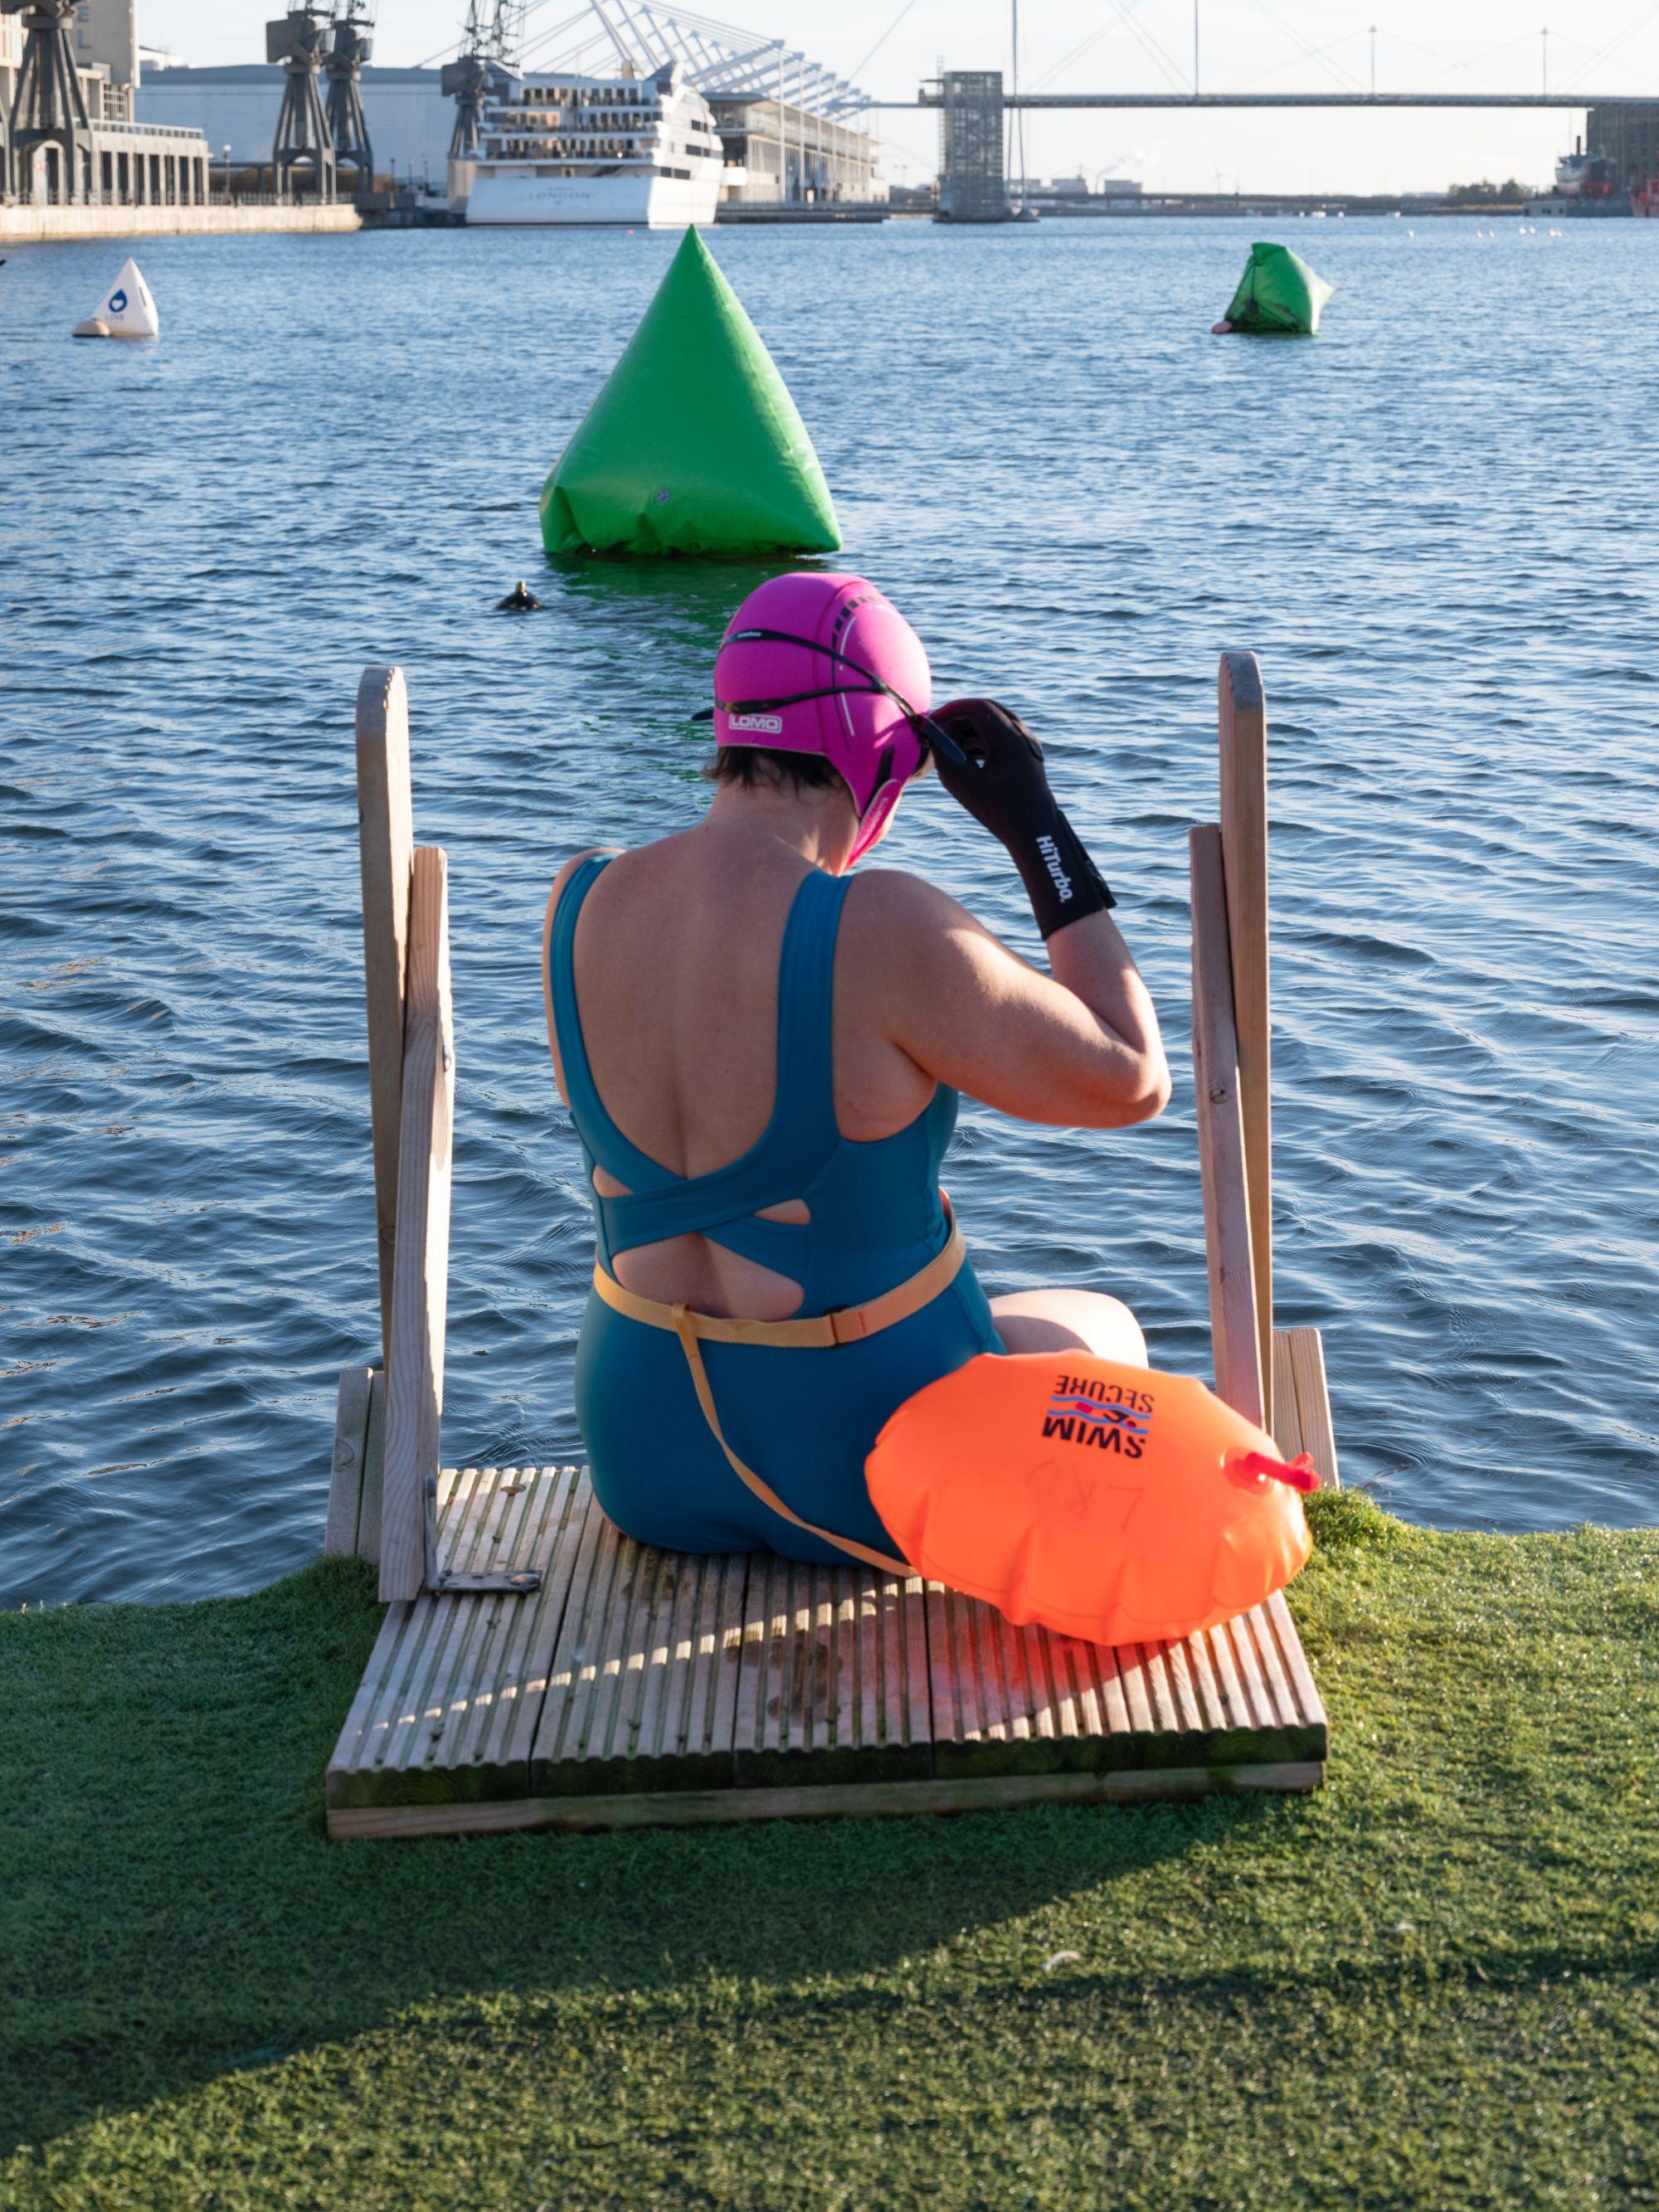 Swimmer in a bathing suit and cap sitting on the dock edge ready to go in